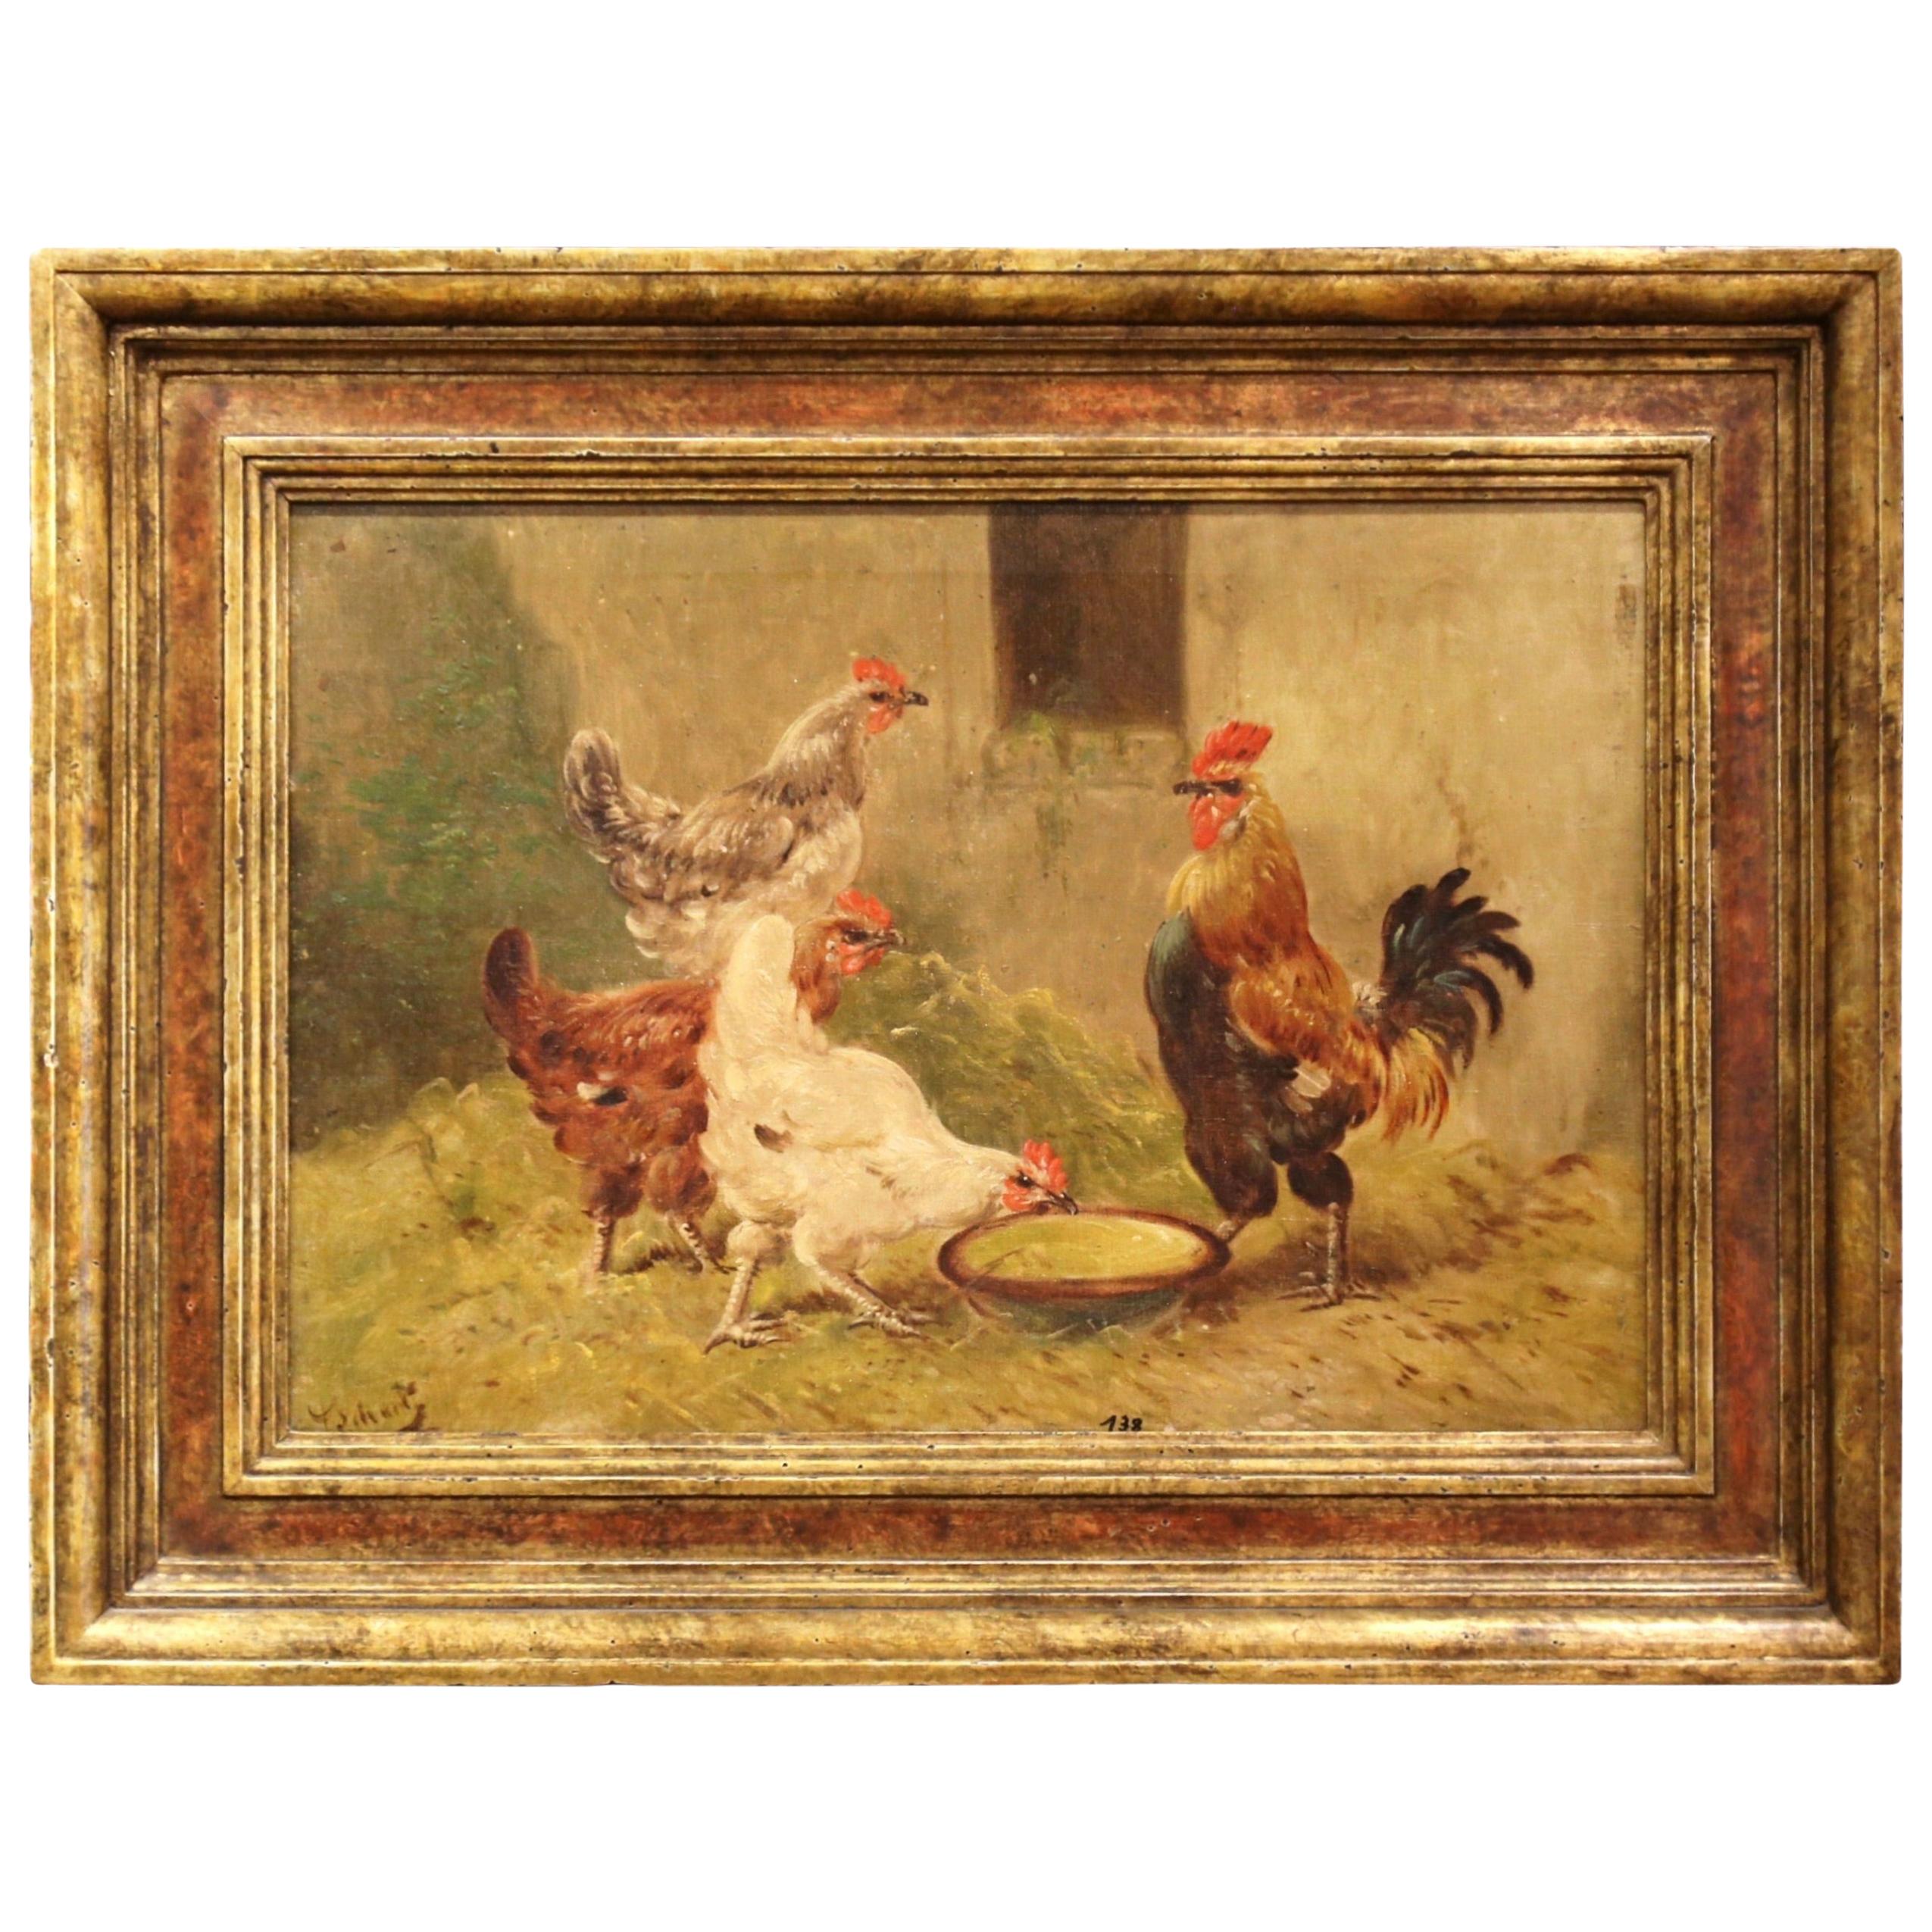 Early 20th Century French Chicken Painting in Carved Frame Signed and Numbered